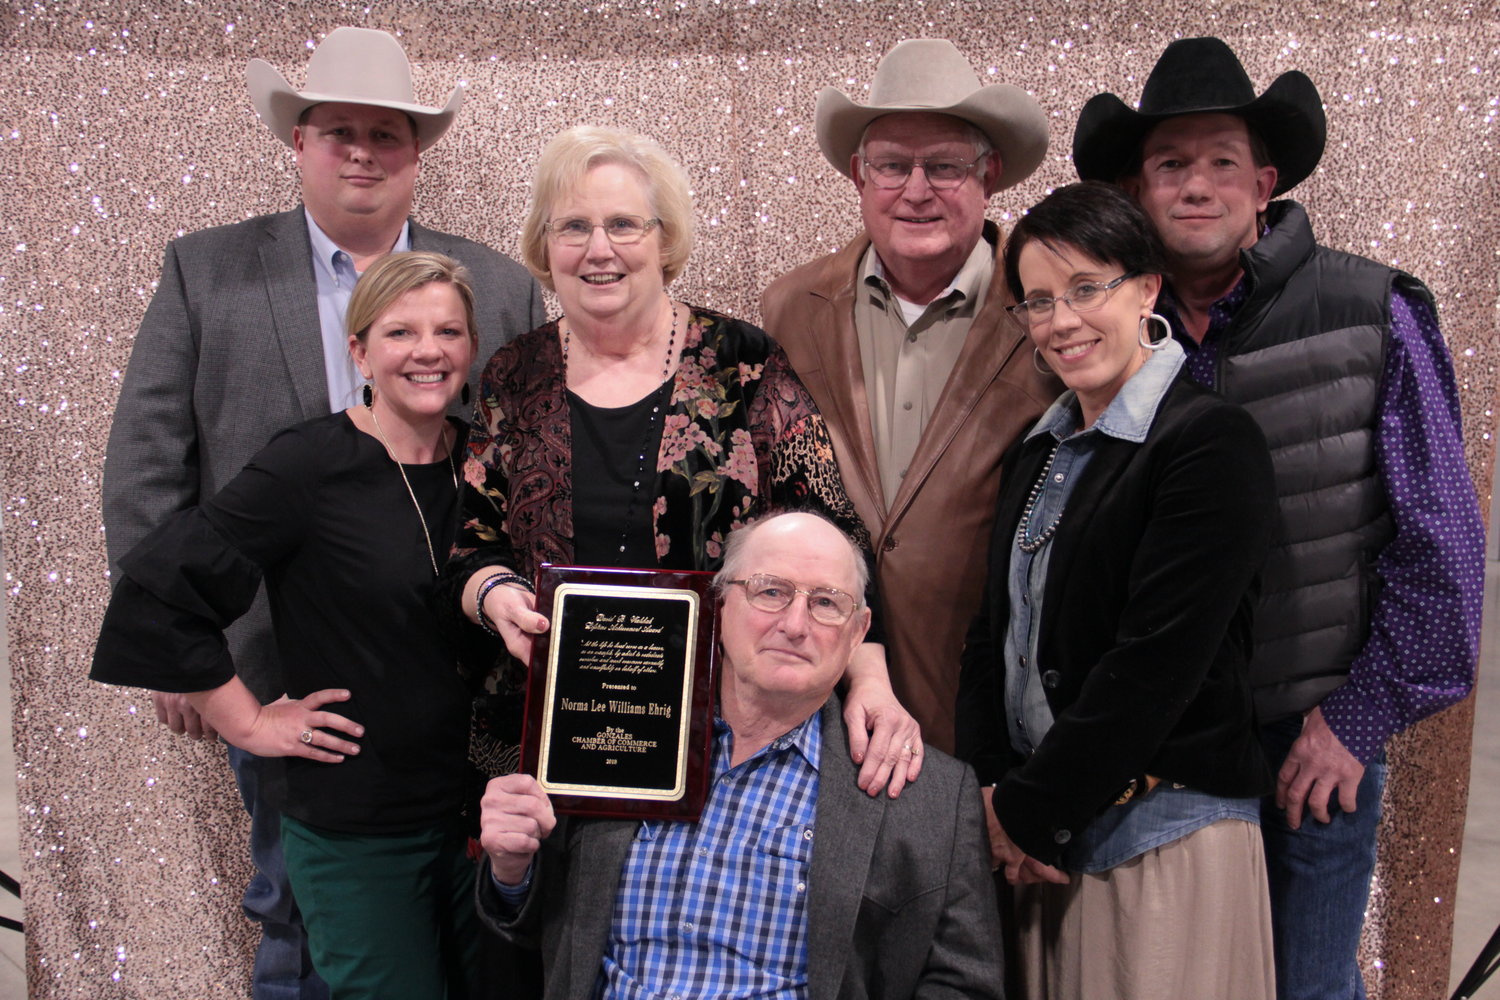 Norma Ehrig is surrounded by her family as she accepts the David B. Walshak Lifetime Achievement Award at the recent Gonzales Chamber of Commerce banquet.